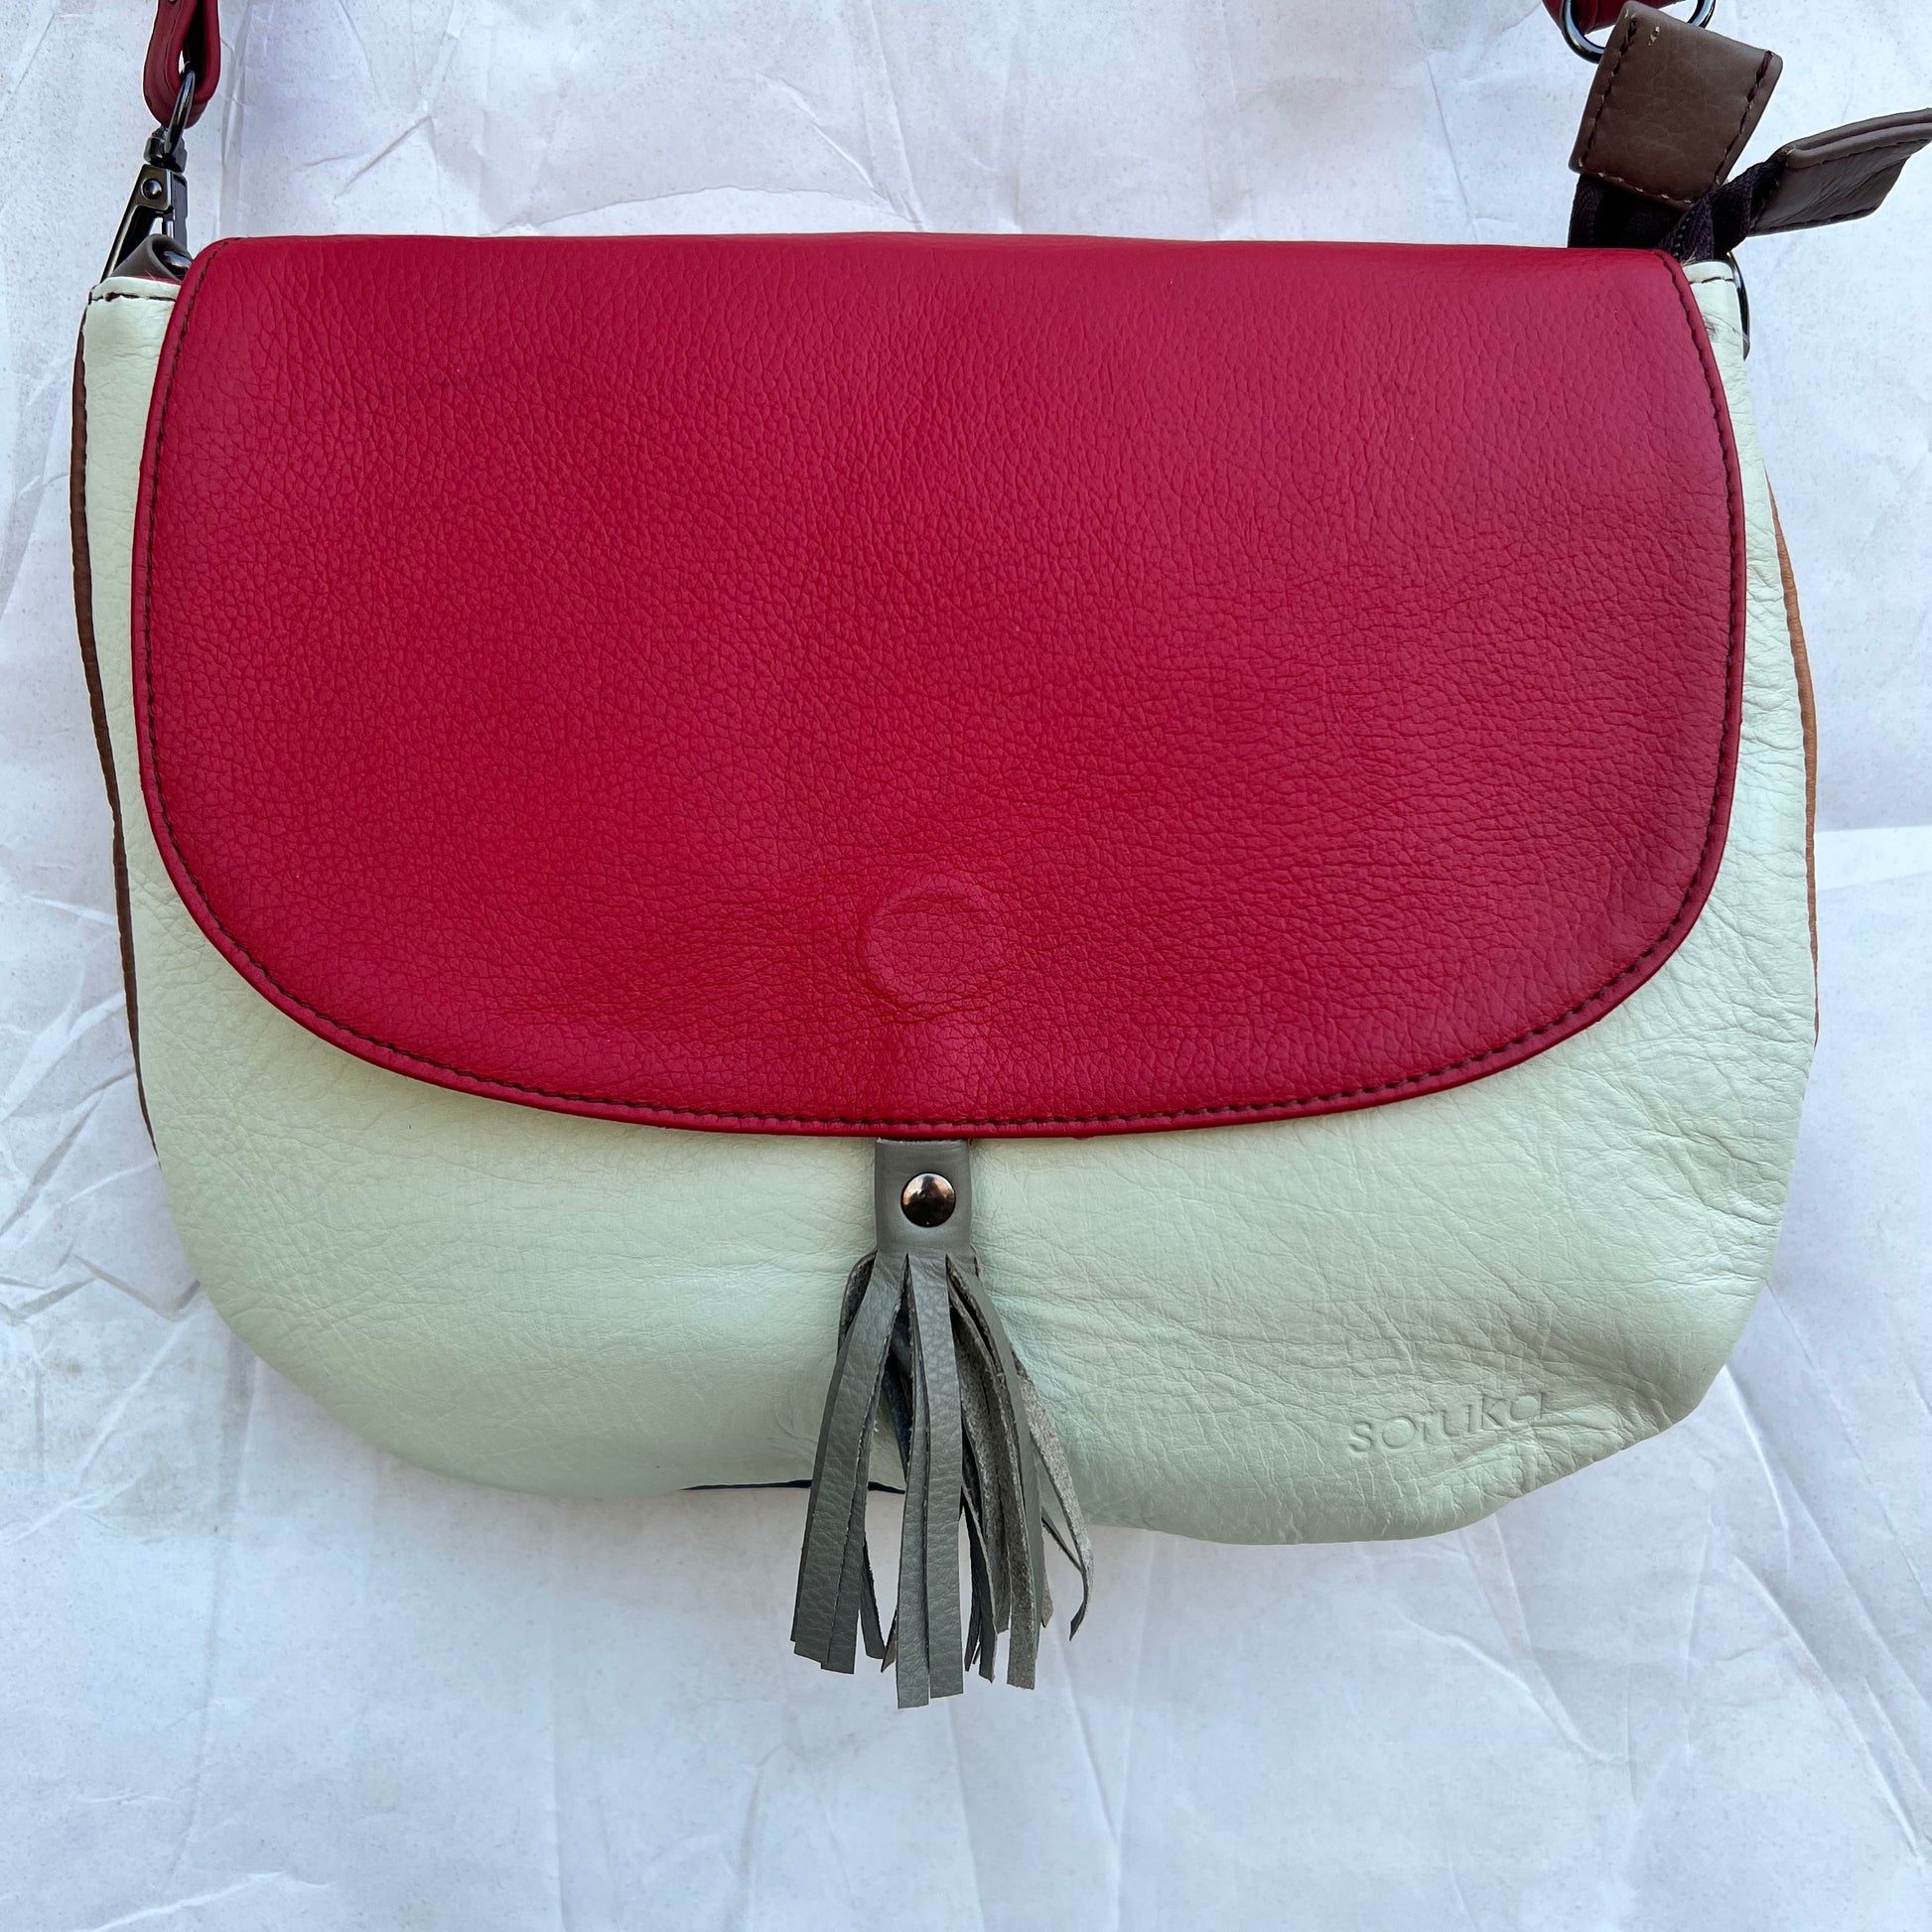 rounded cream purse with red flap, taupe tassel, and red strap.